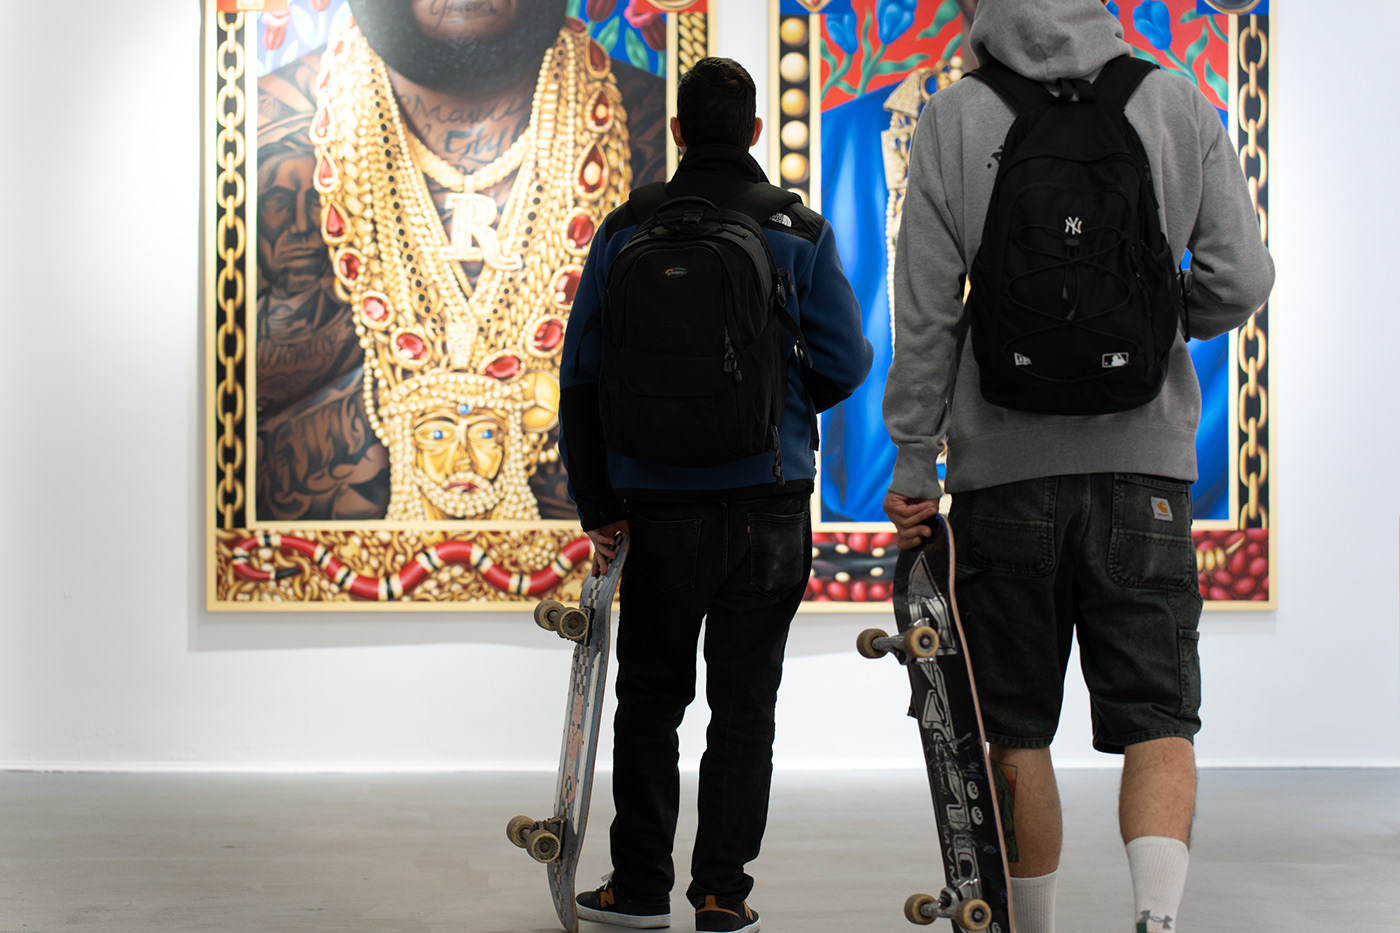 painting   acrylic on canvas fine art bling gold fanboy MOBIUS GALLERY Exhibition  Rick Ross slick rick